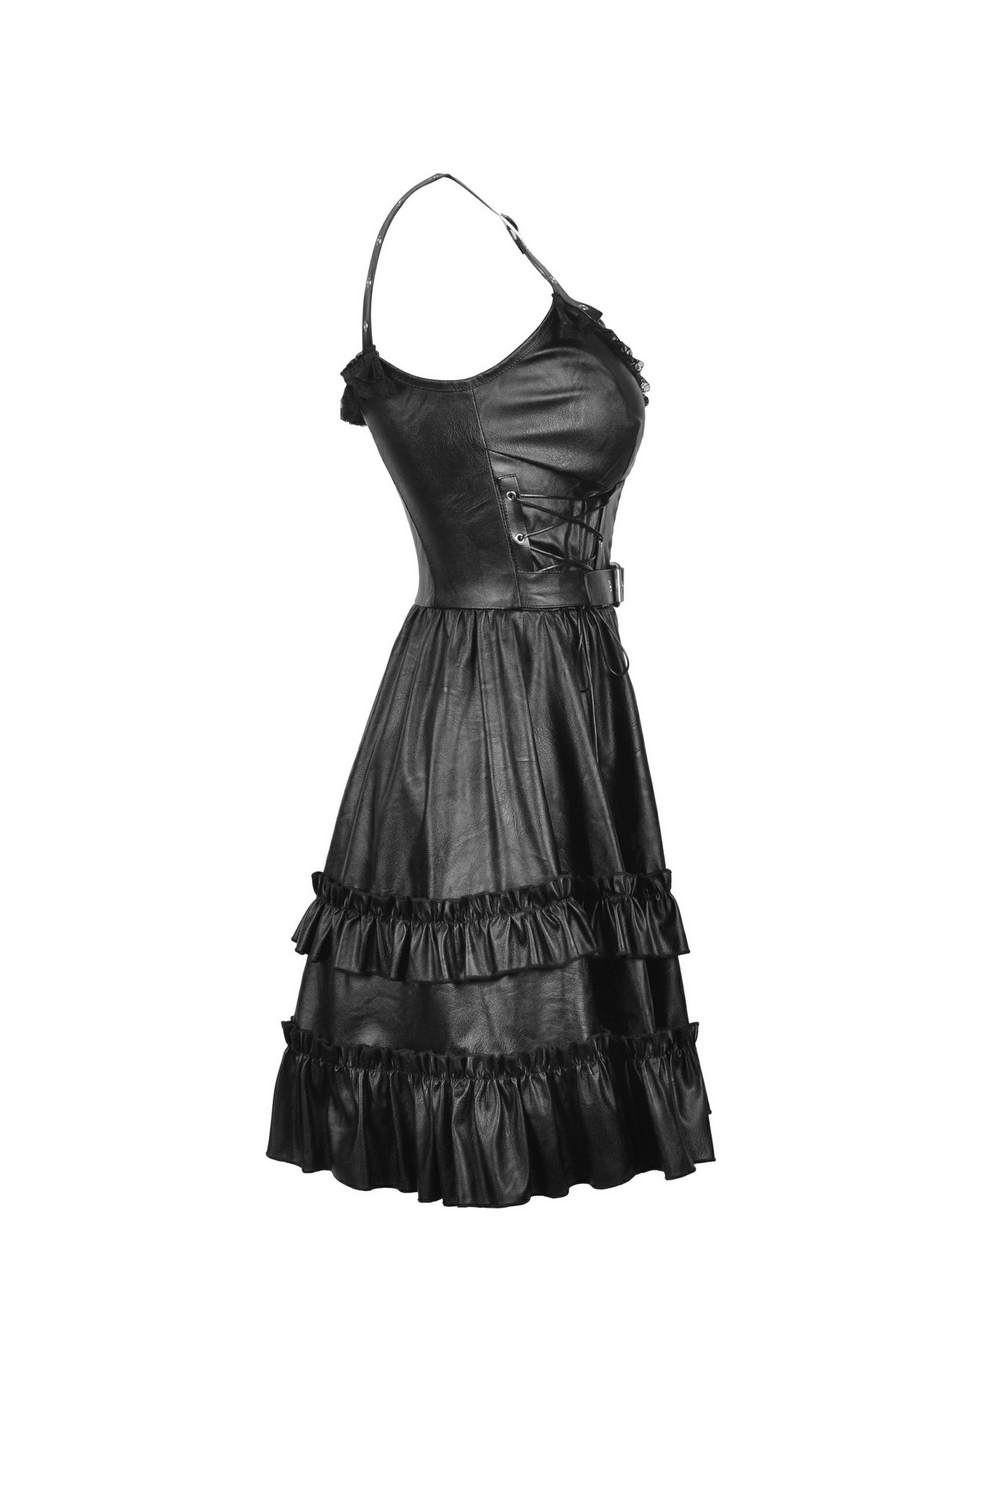 Elegant Black Leather Dress with Ruffled Layers and Belt